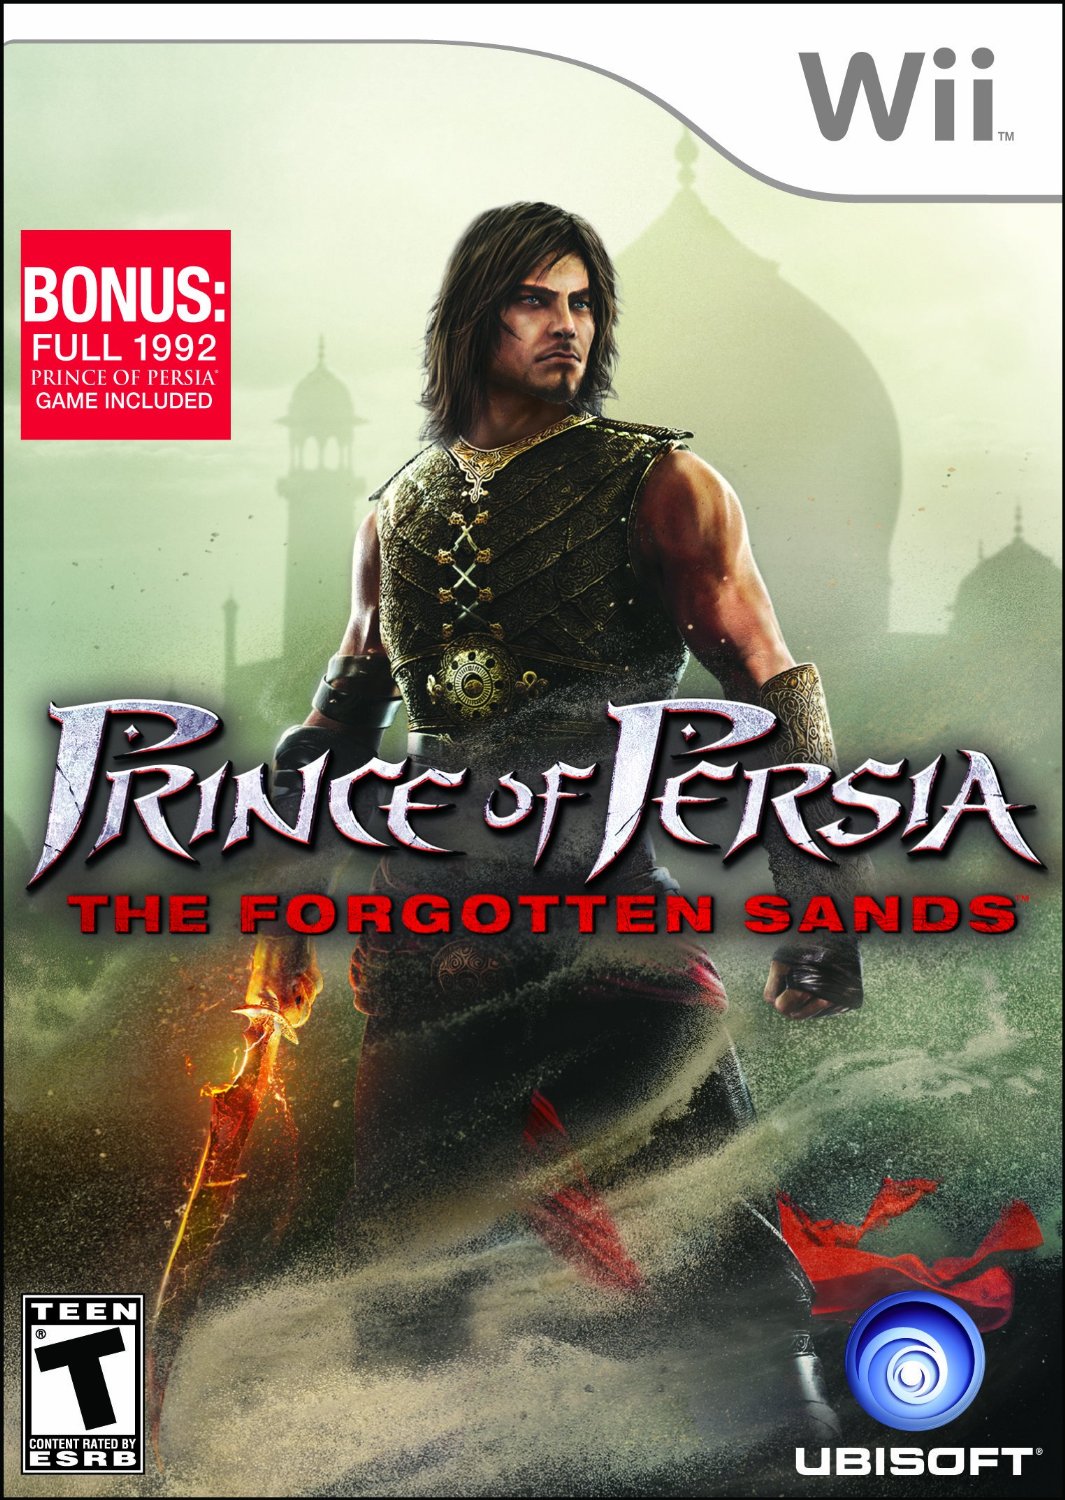 Prince Of Persia: Warrior Within (GC) - The Cover Project